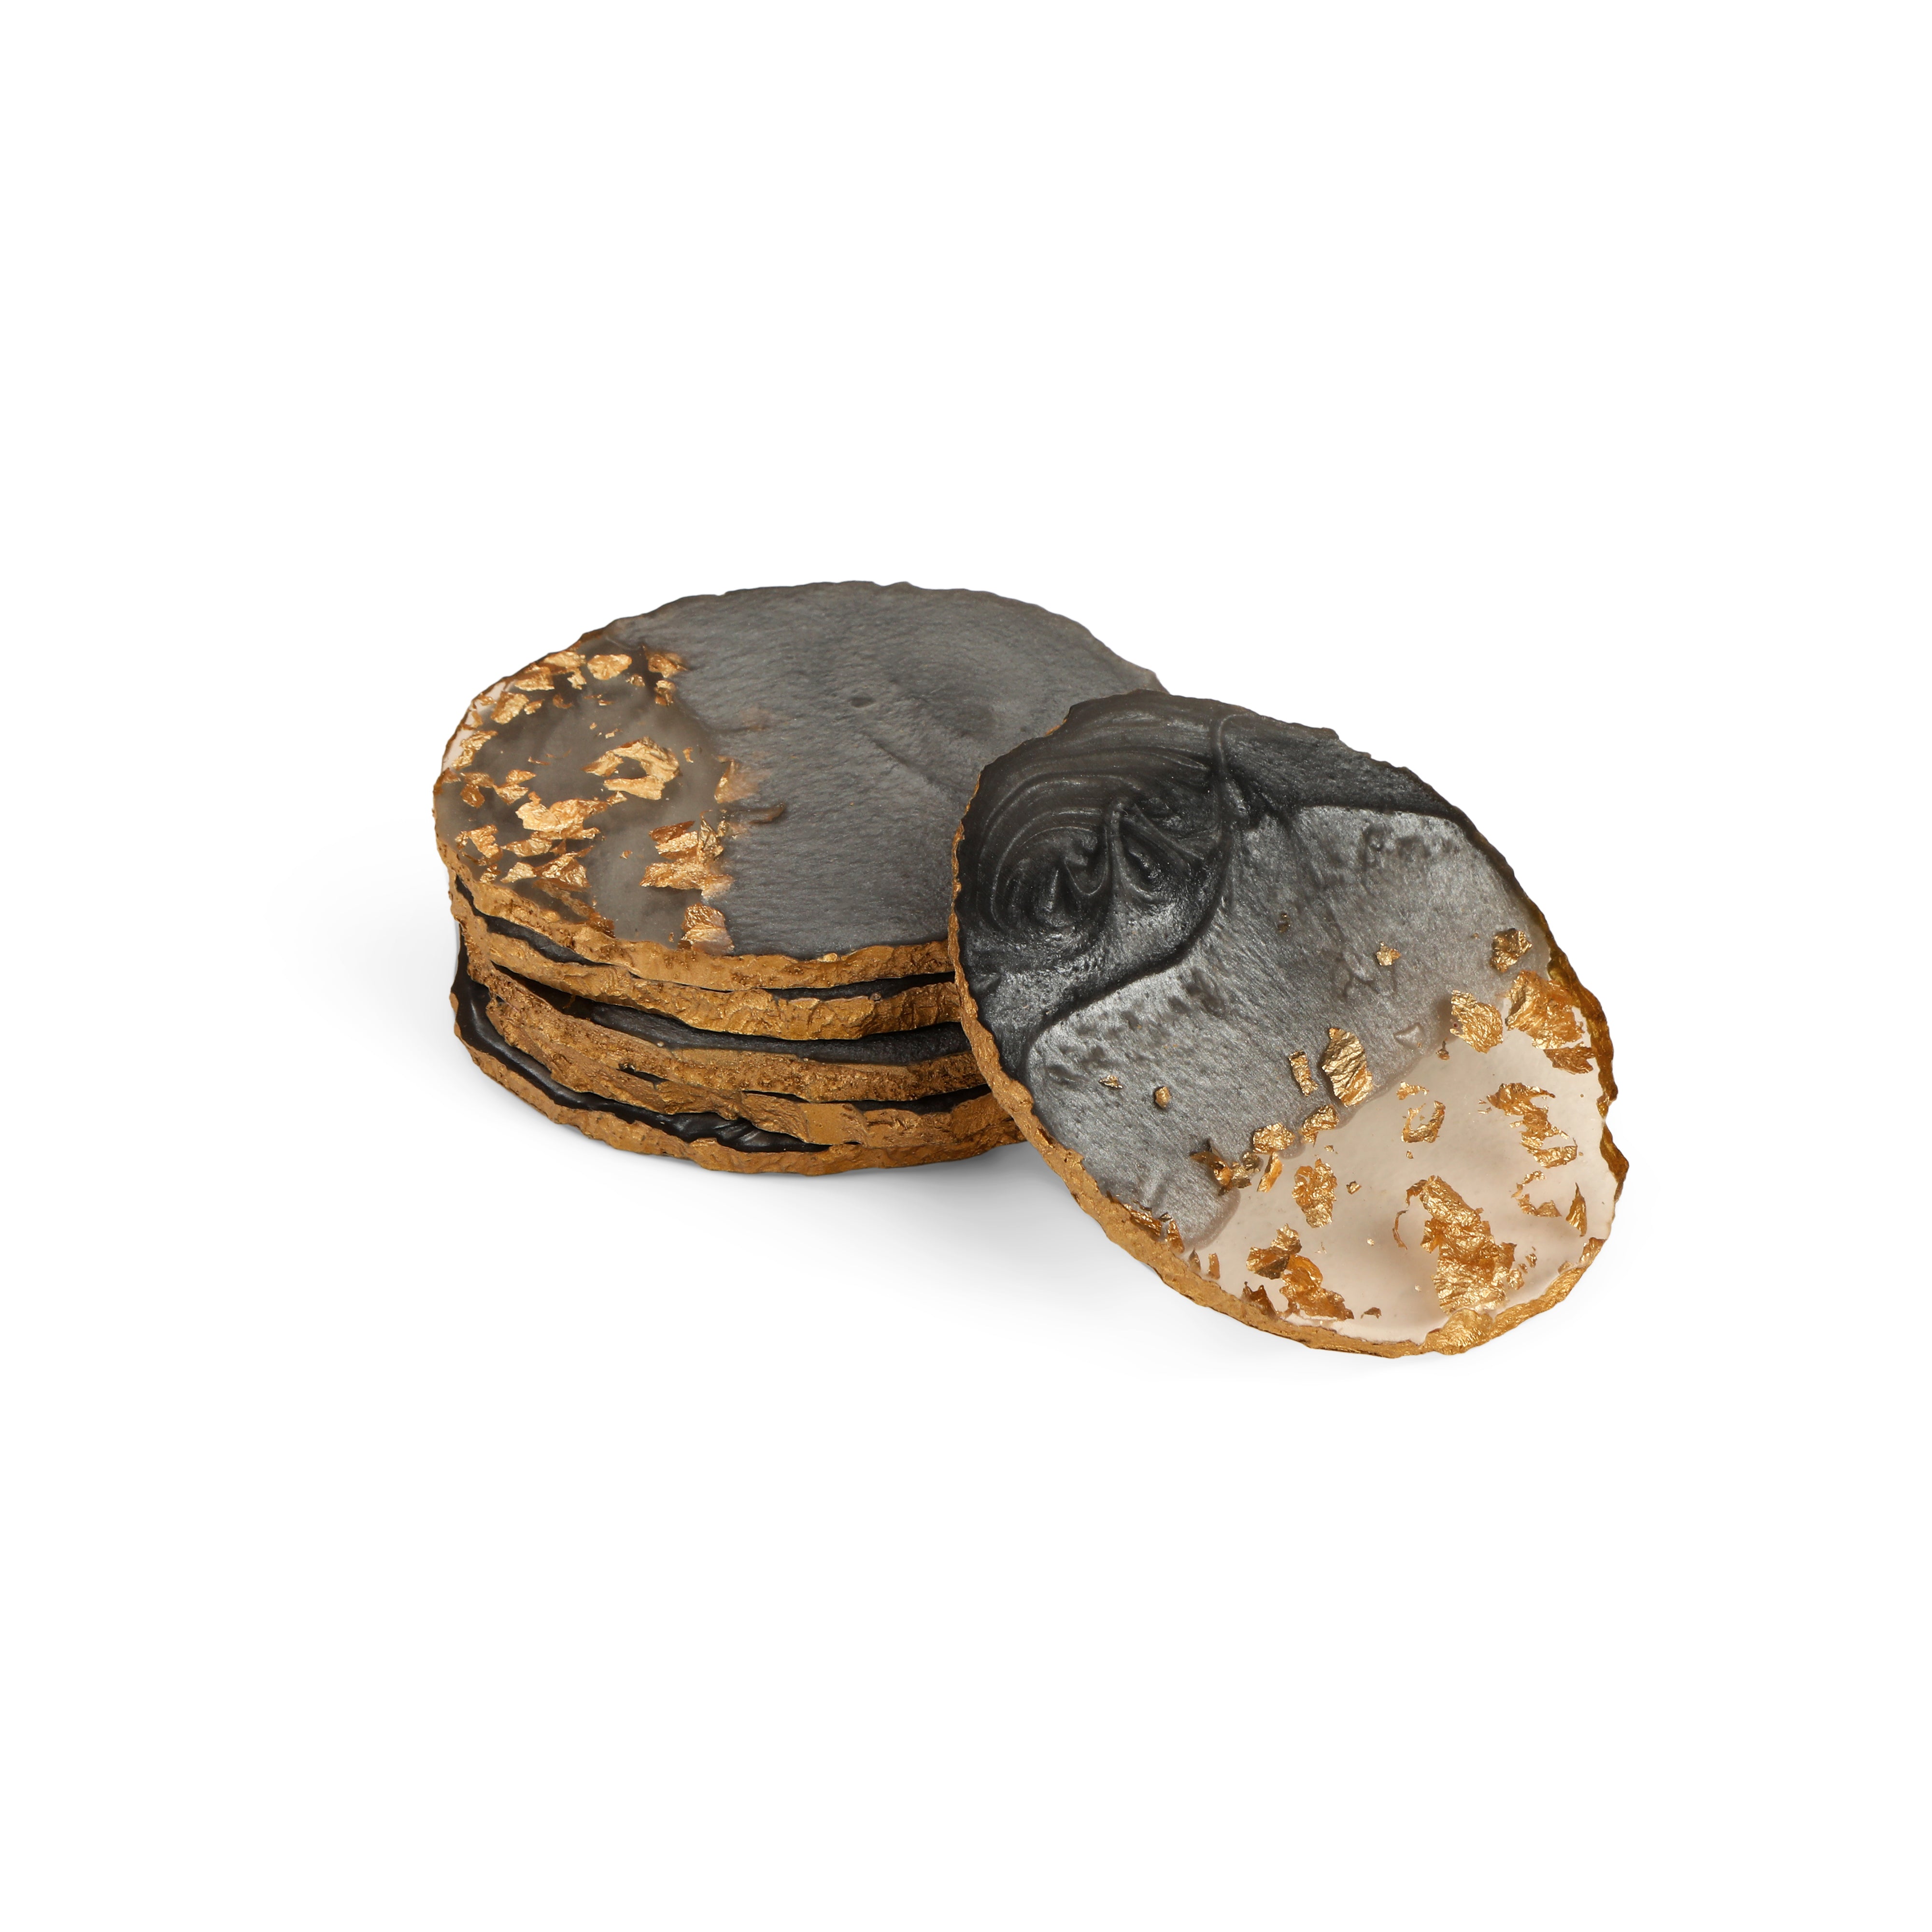 Dual Tone Grey and Gold Resin Table Coasters (Set of 6)